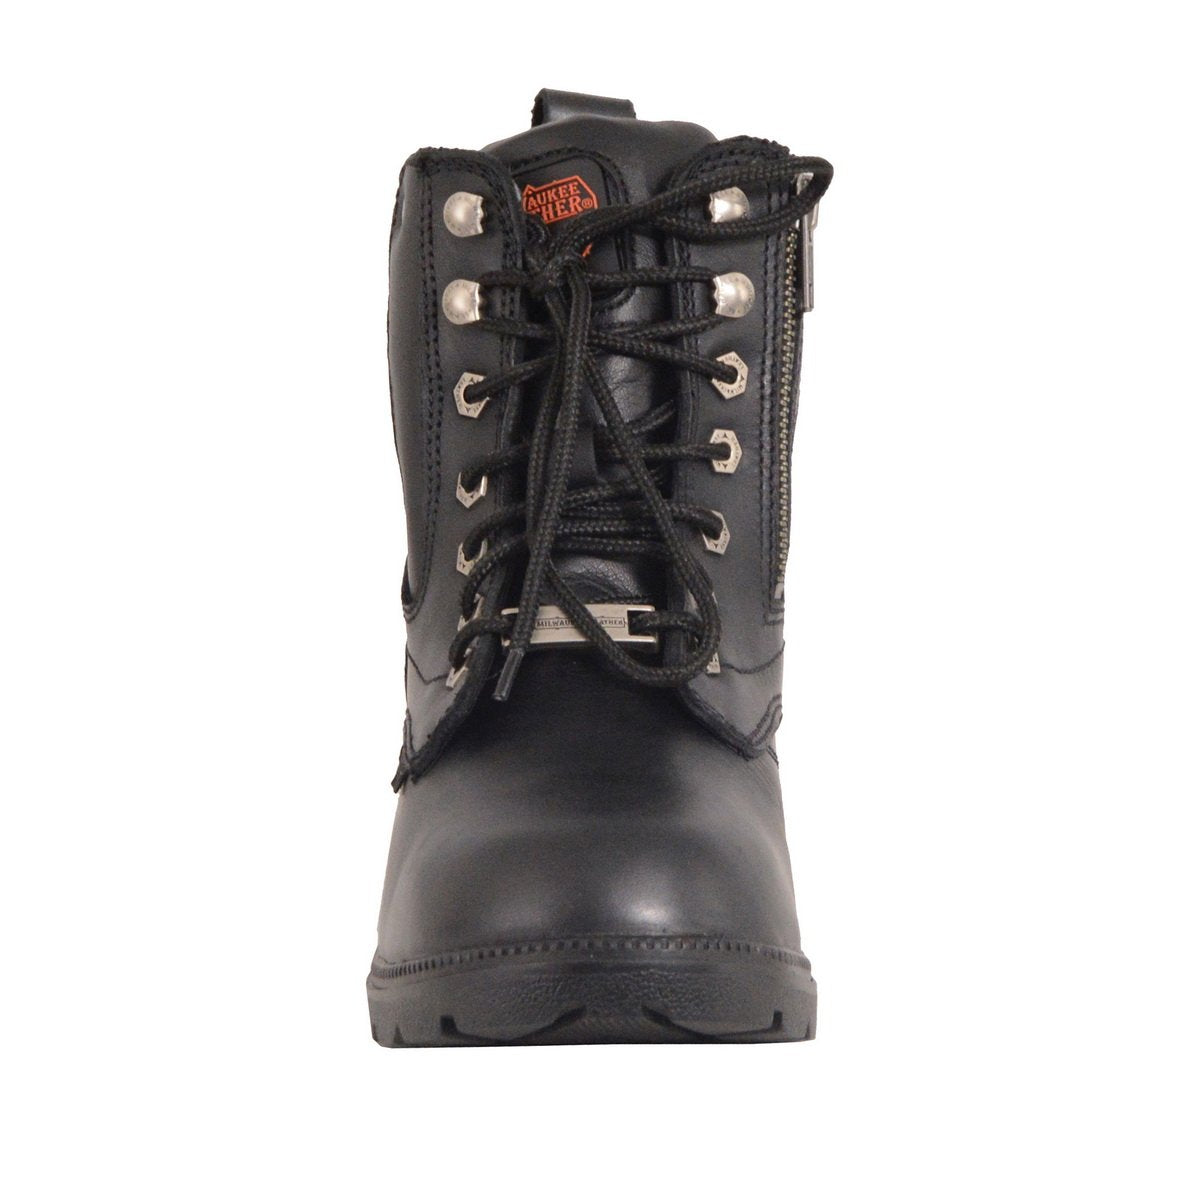 Womens Black Waterproof Lace-Up Boots with Side Zipper